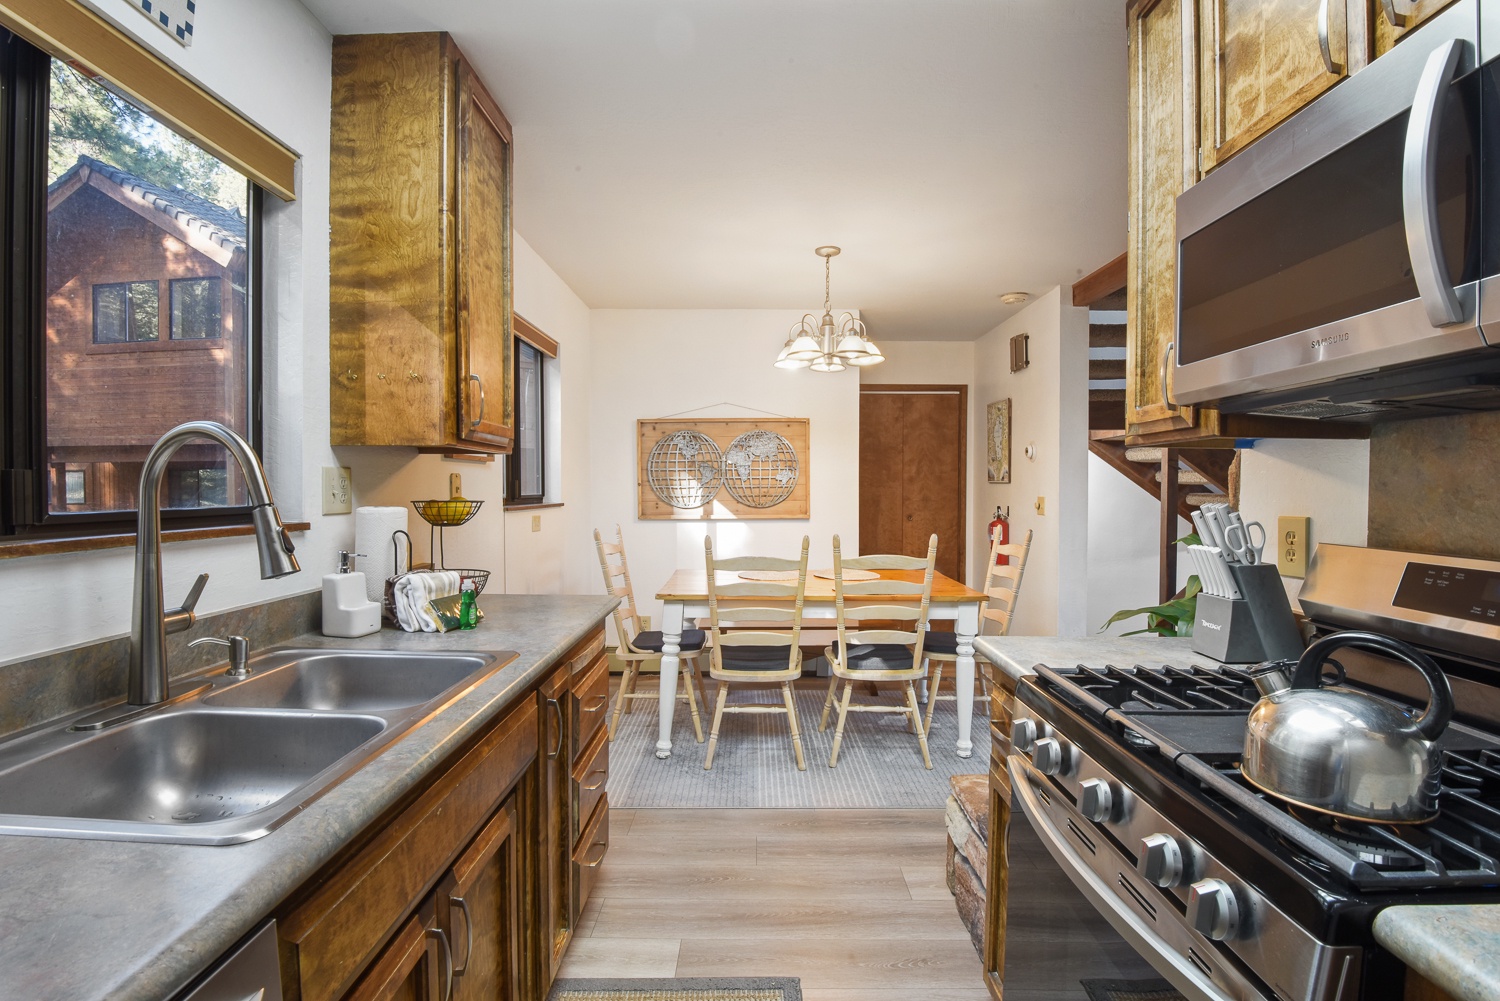 Unit #3: The cozy kitchen is well-equipped and will have you feeling right at home